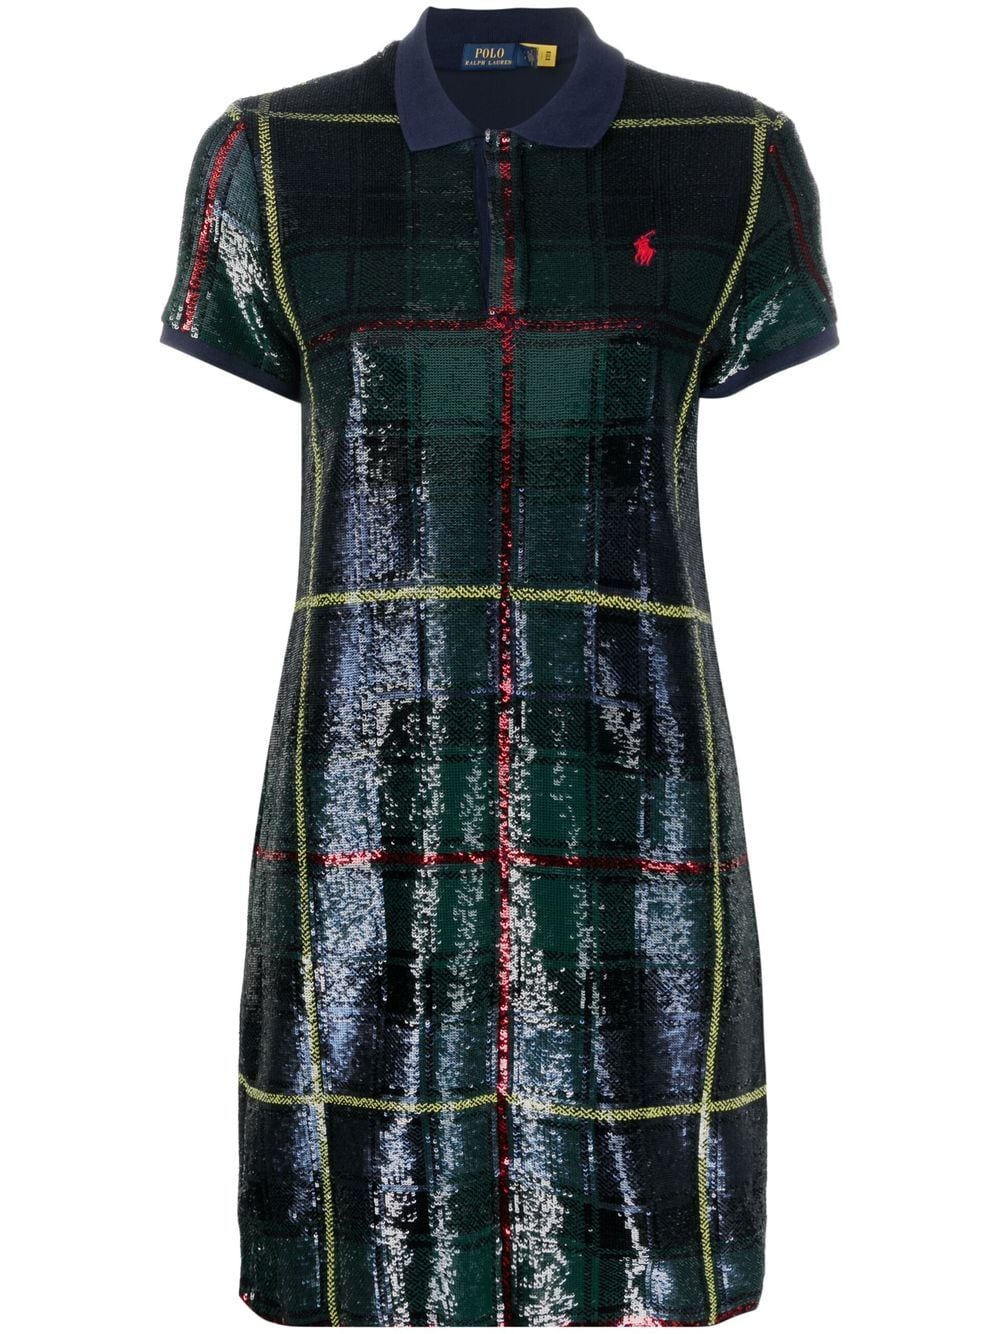 Polo Ralph Lauren sequin-embellished plaid-patterned Polo Dress - Farfetch